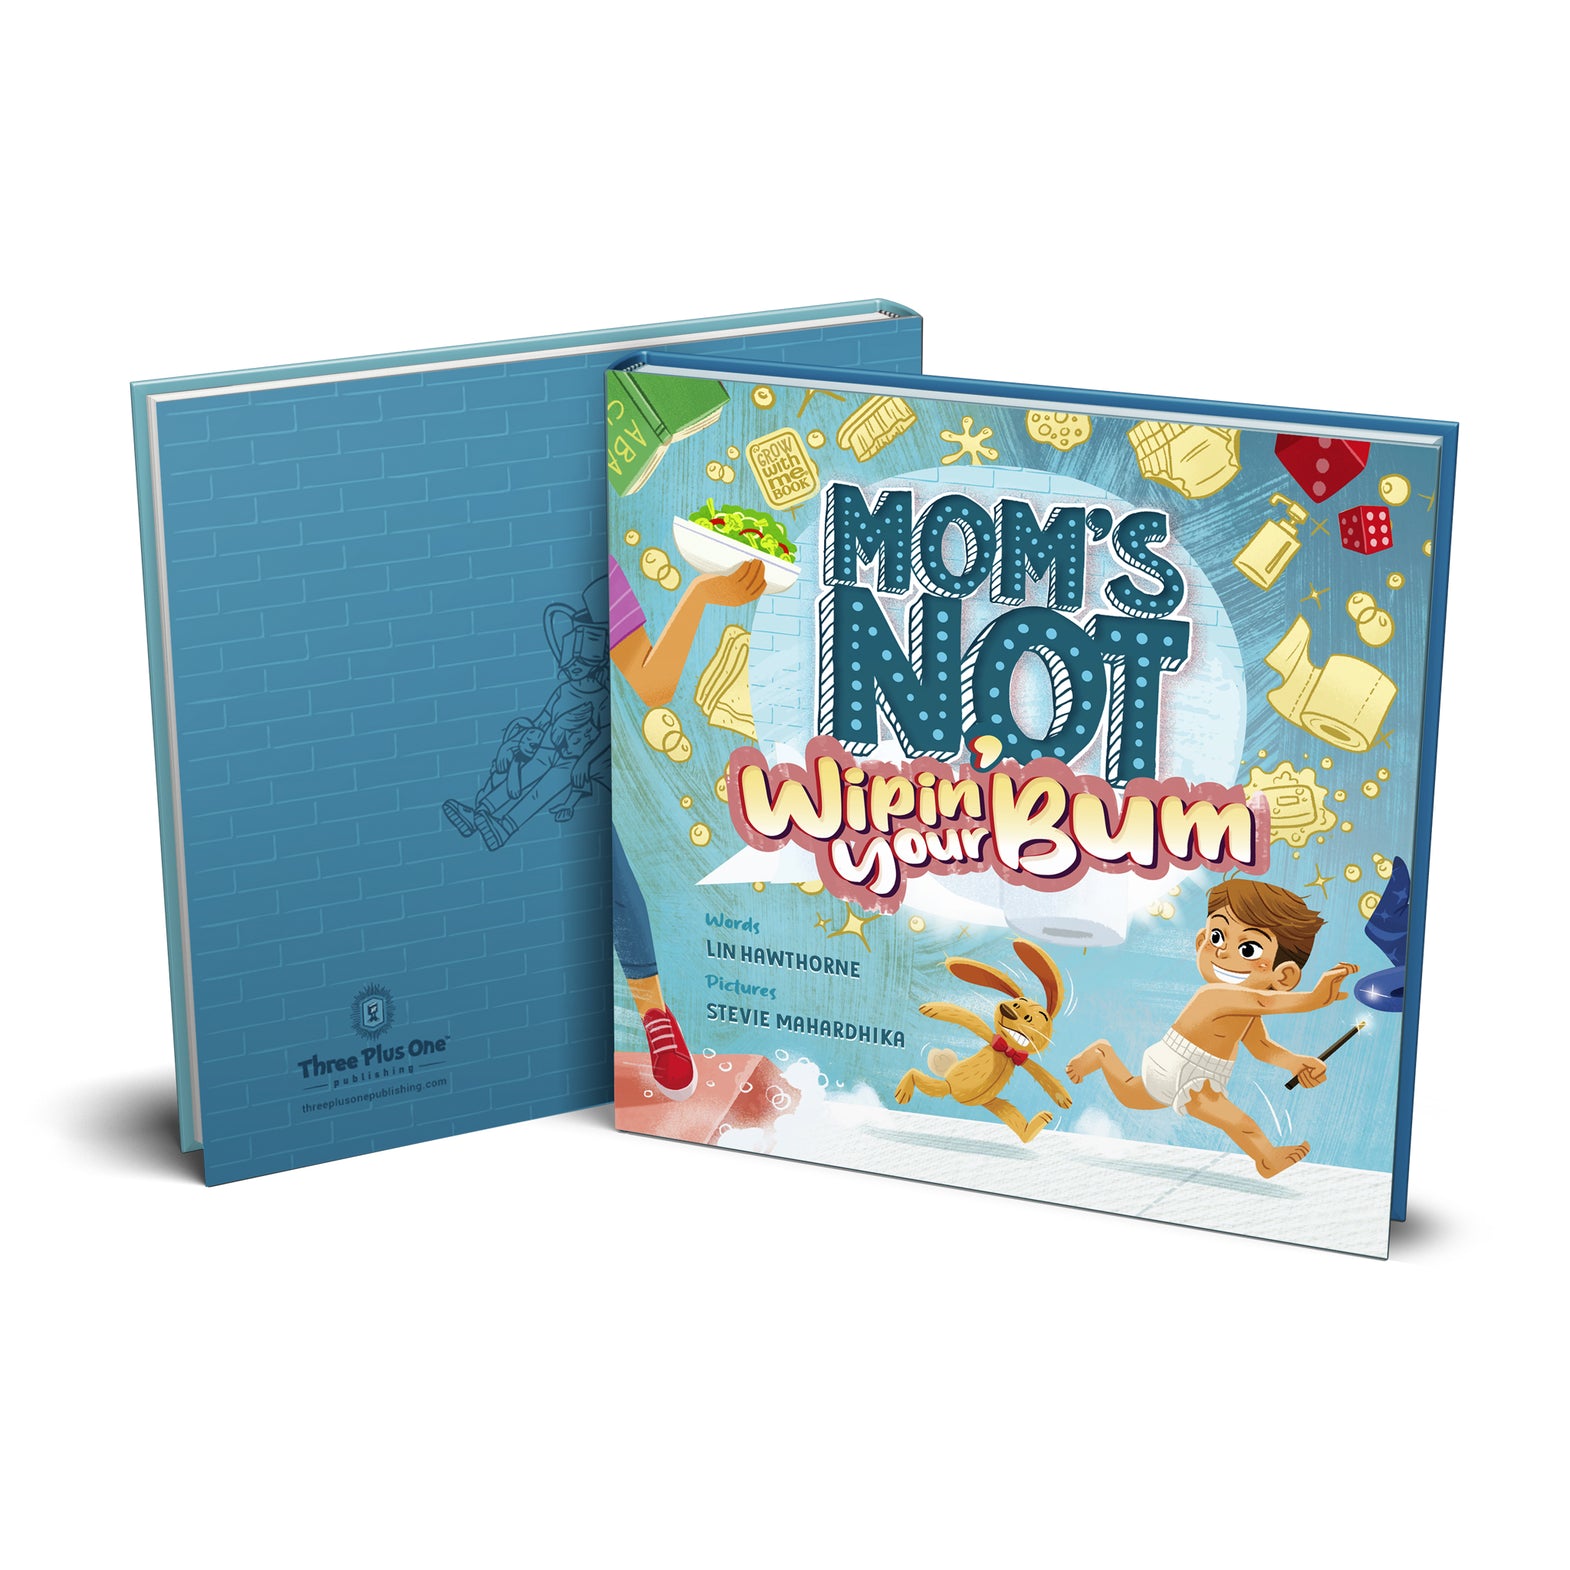 Mom's Not Wipin' Your Bum [hardcover] book helps your child learn to do things for himself that are age and ability appropriate